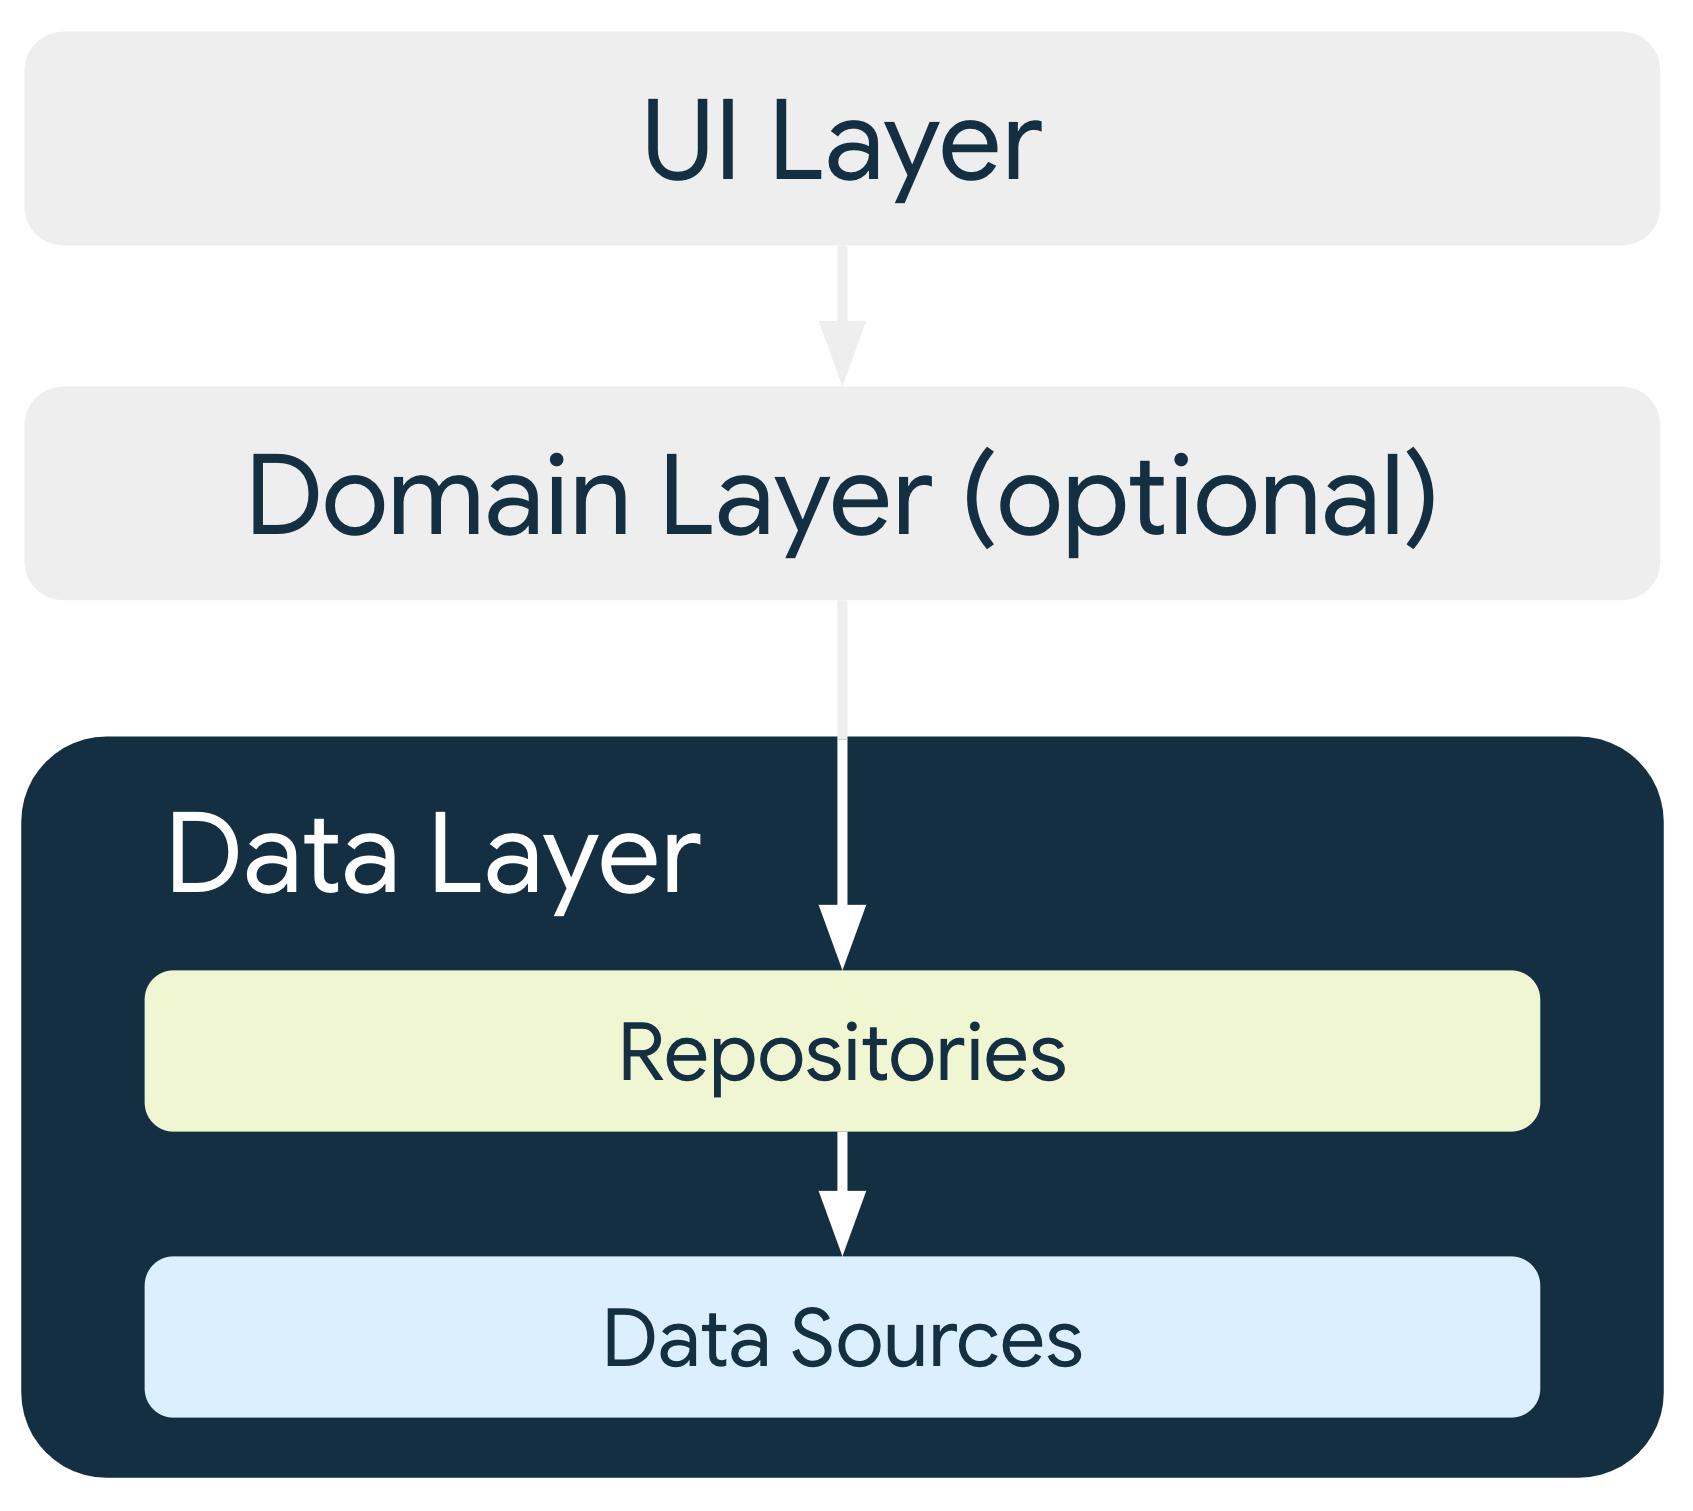 In a typical architecture, the data layer's repositories provide data
    to the rest of the app and depend on the data sources.